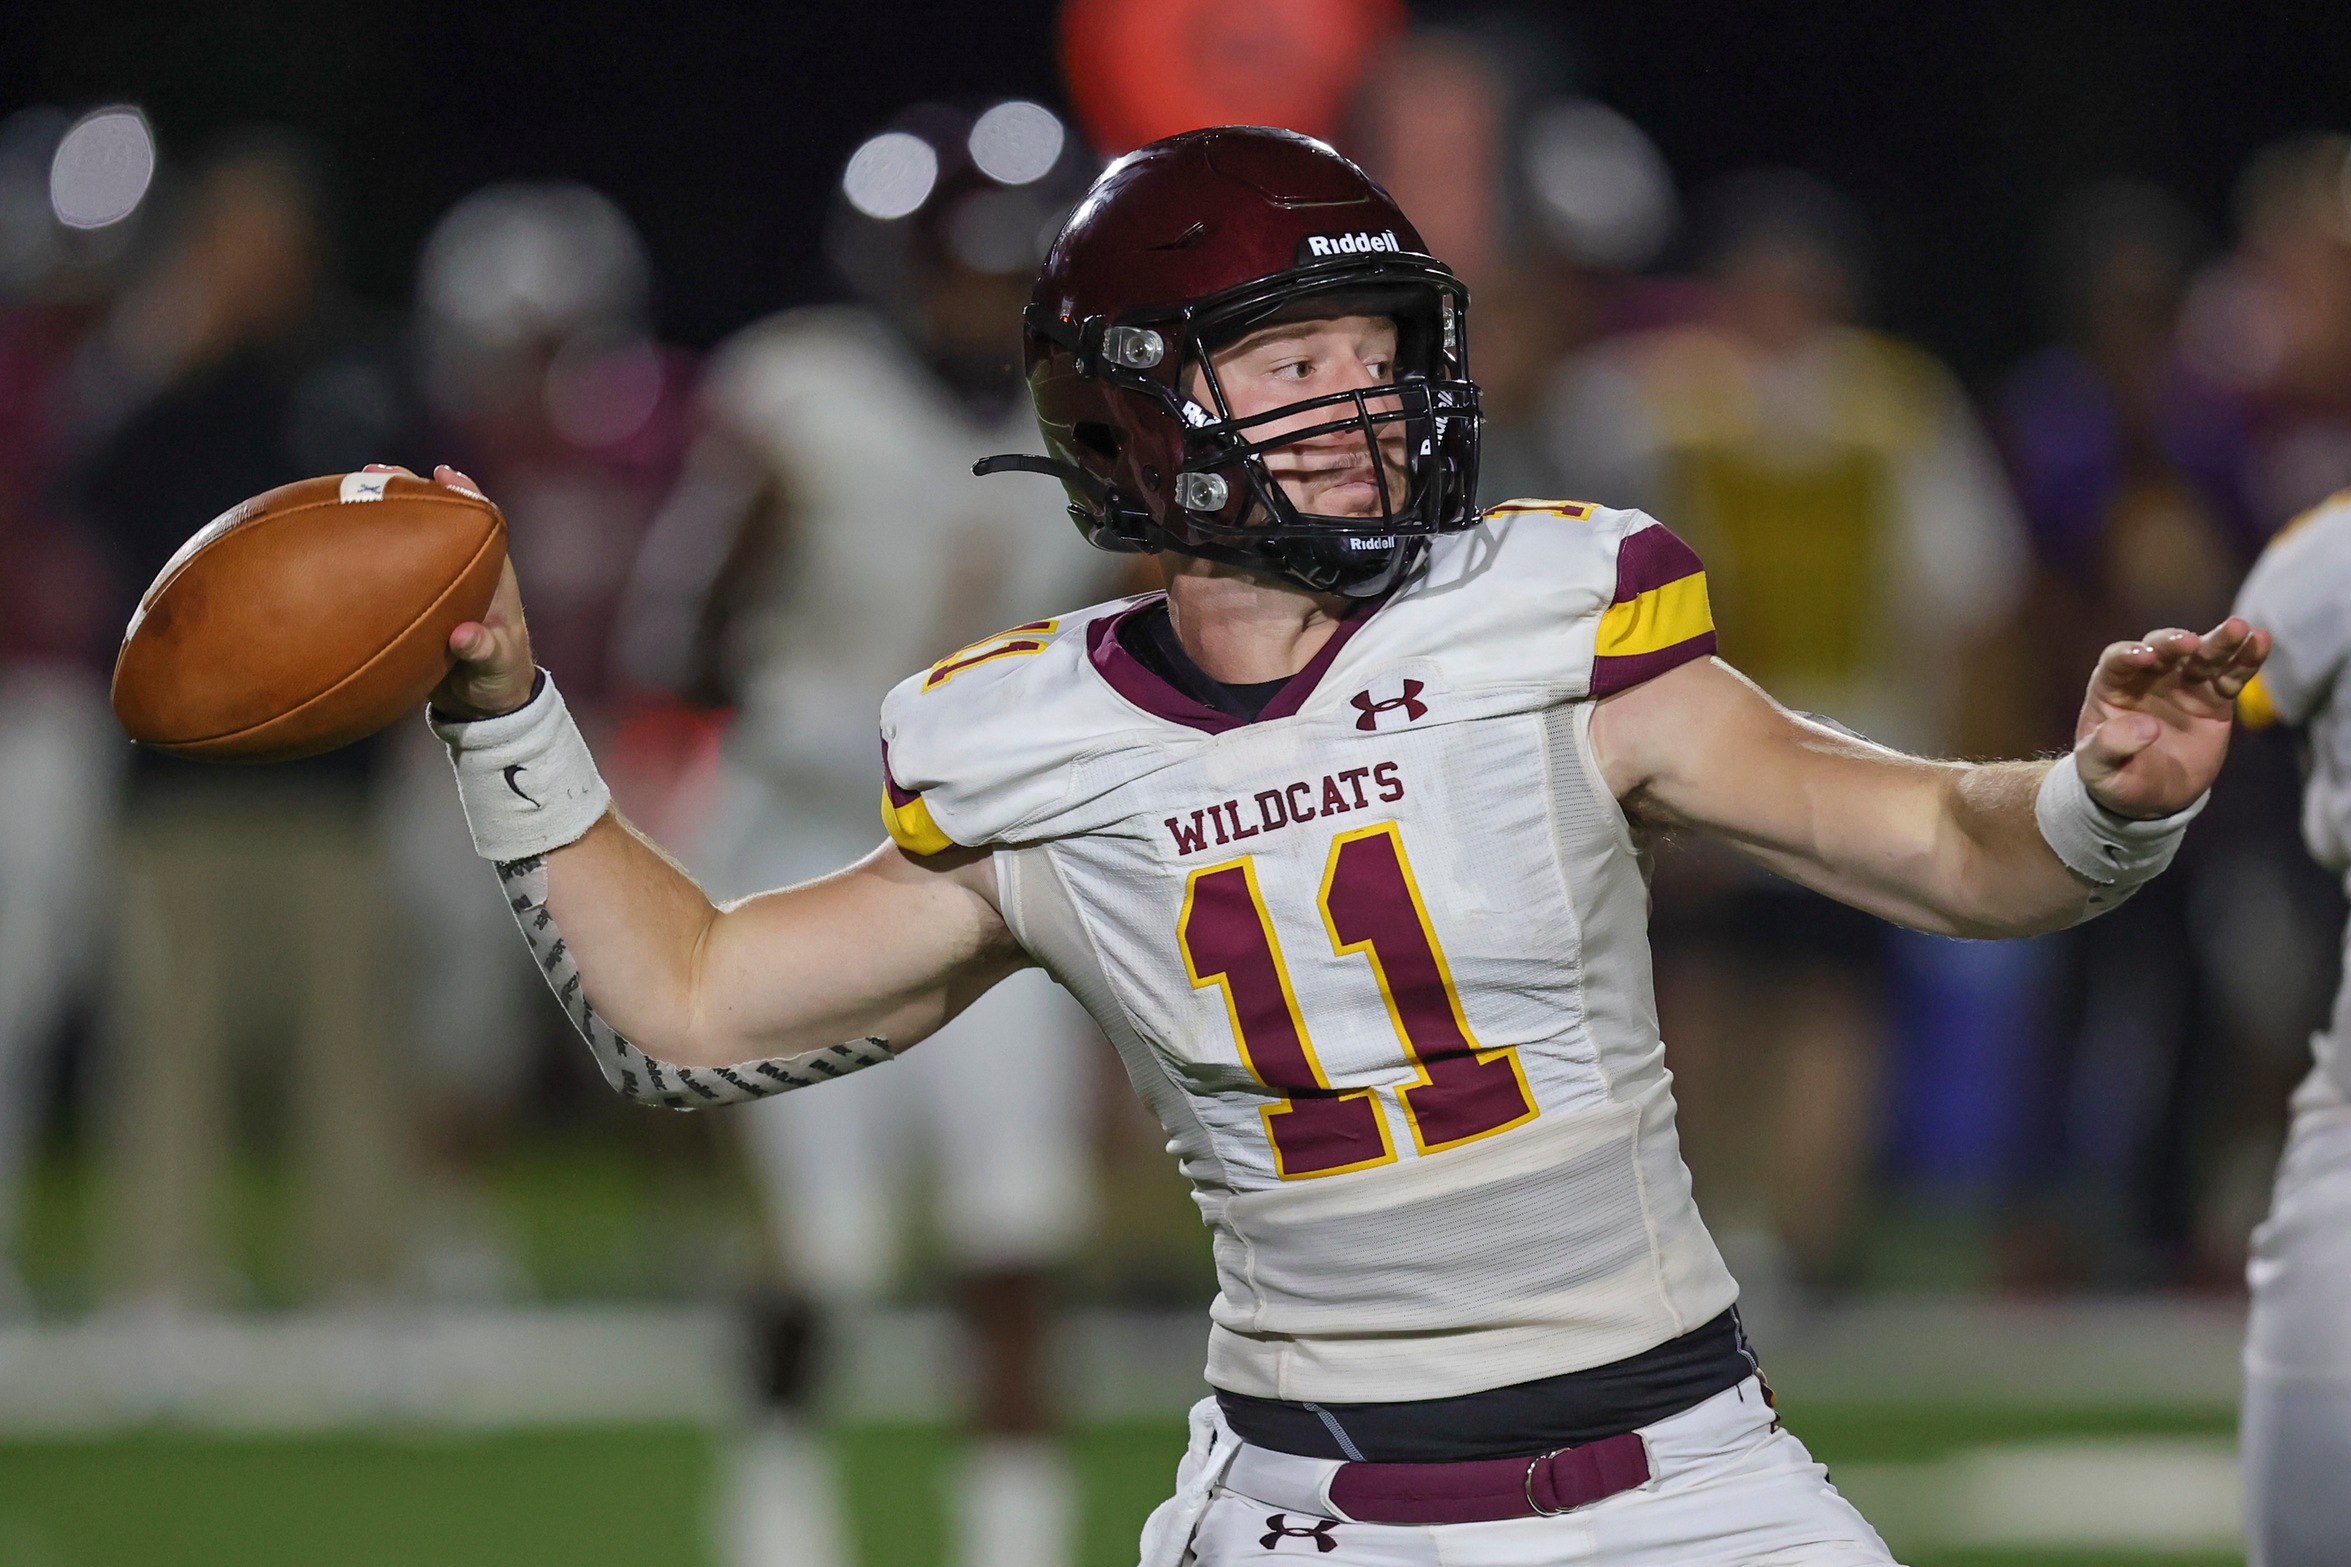 Lawson Pratt’s five touchdowns lead Pearl River to dominant victory